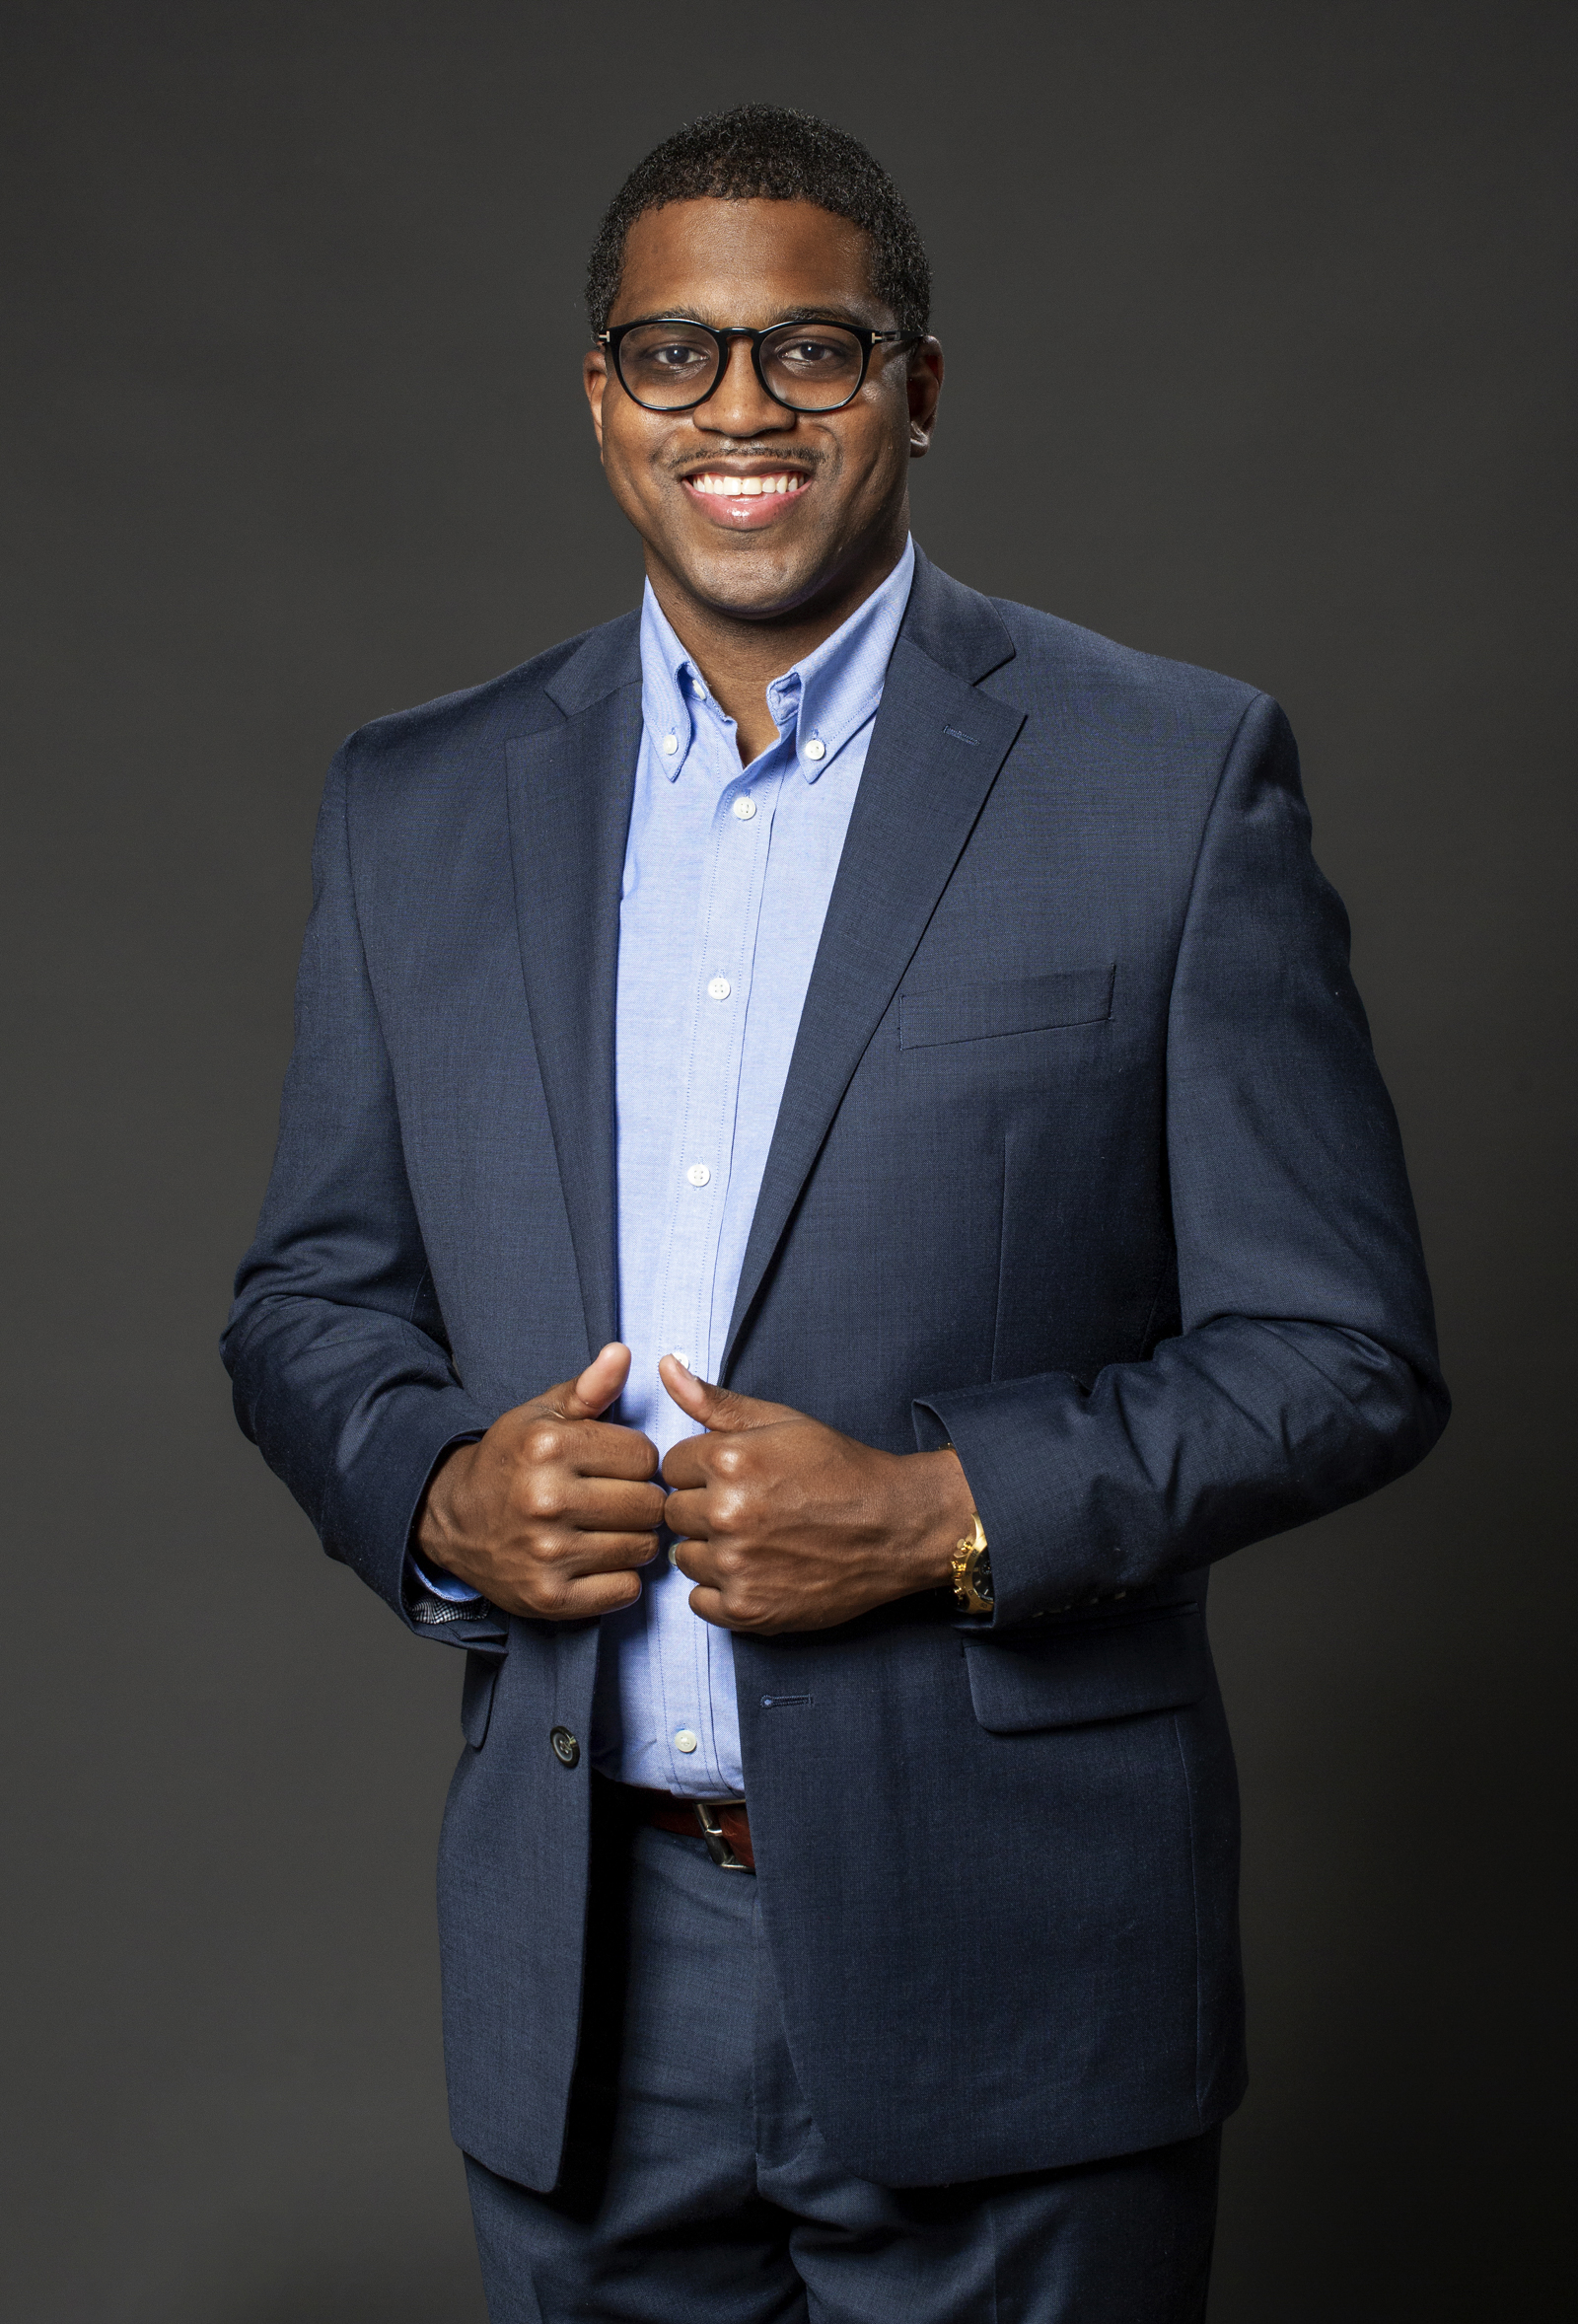 Headshot of a Black man wearing glasses on a gray background